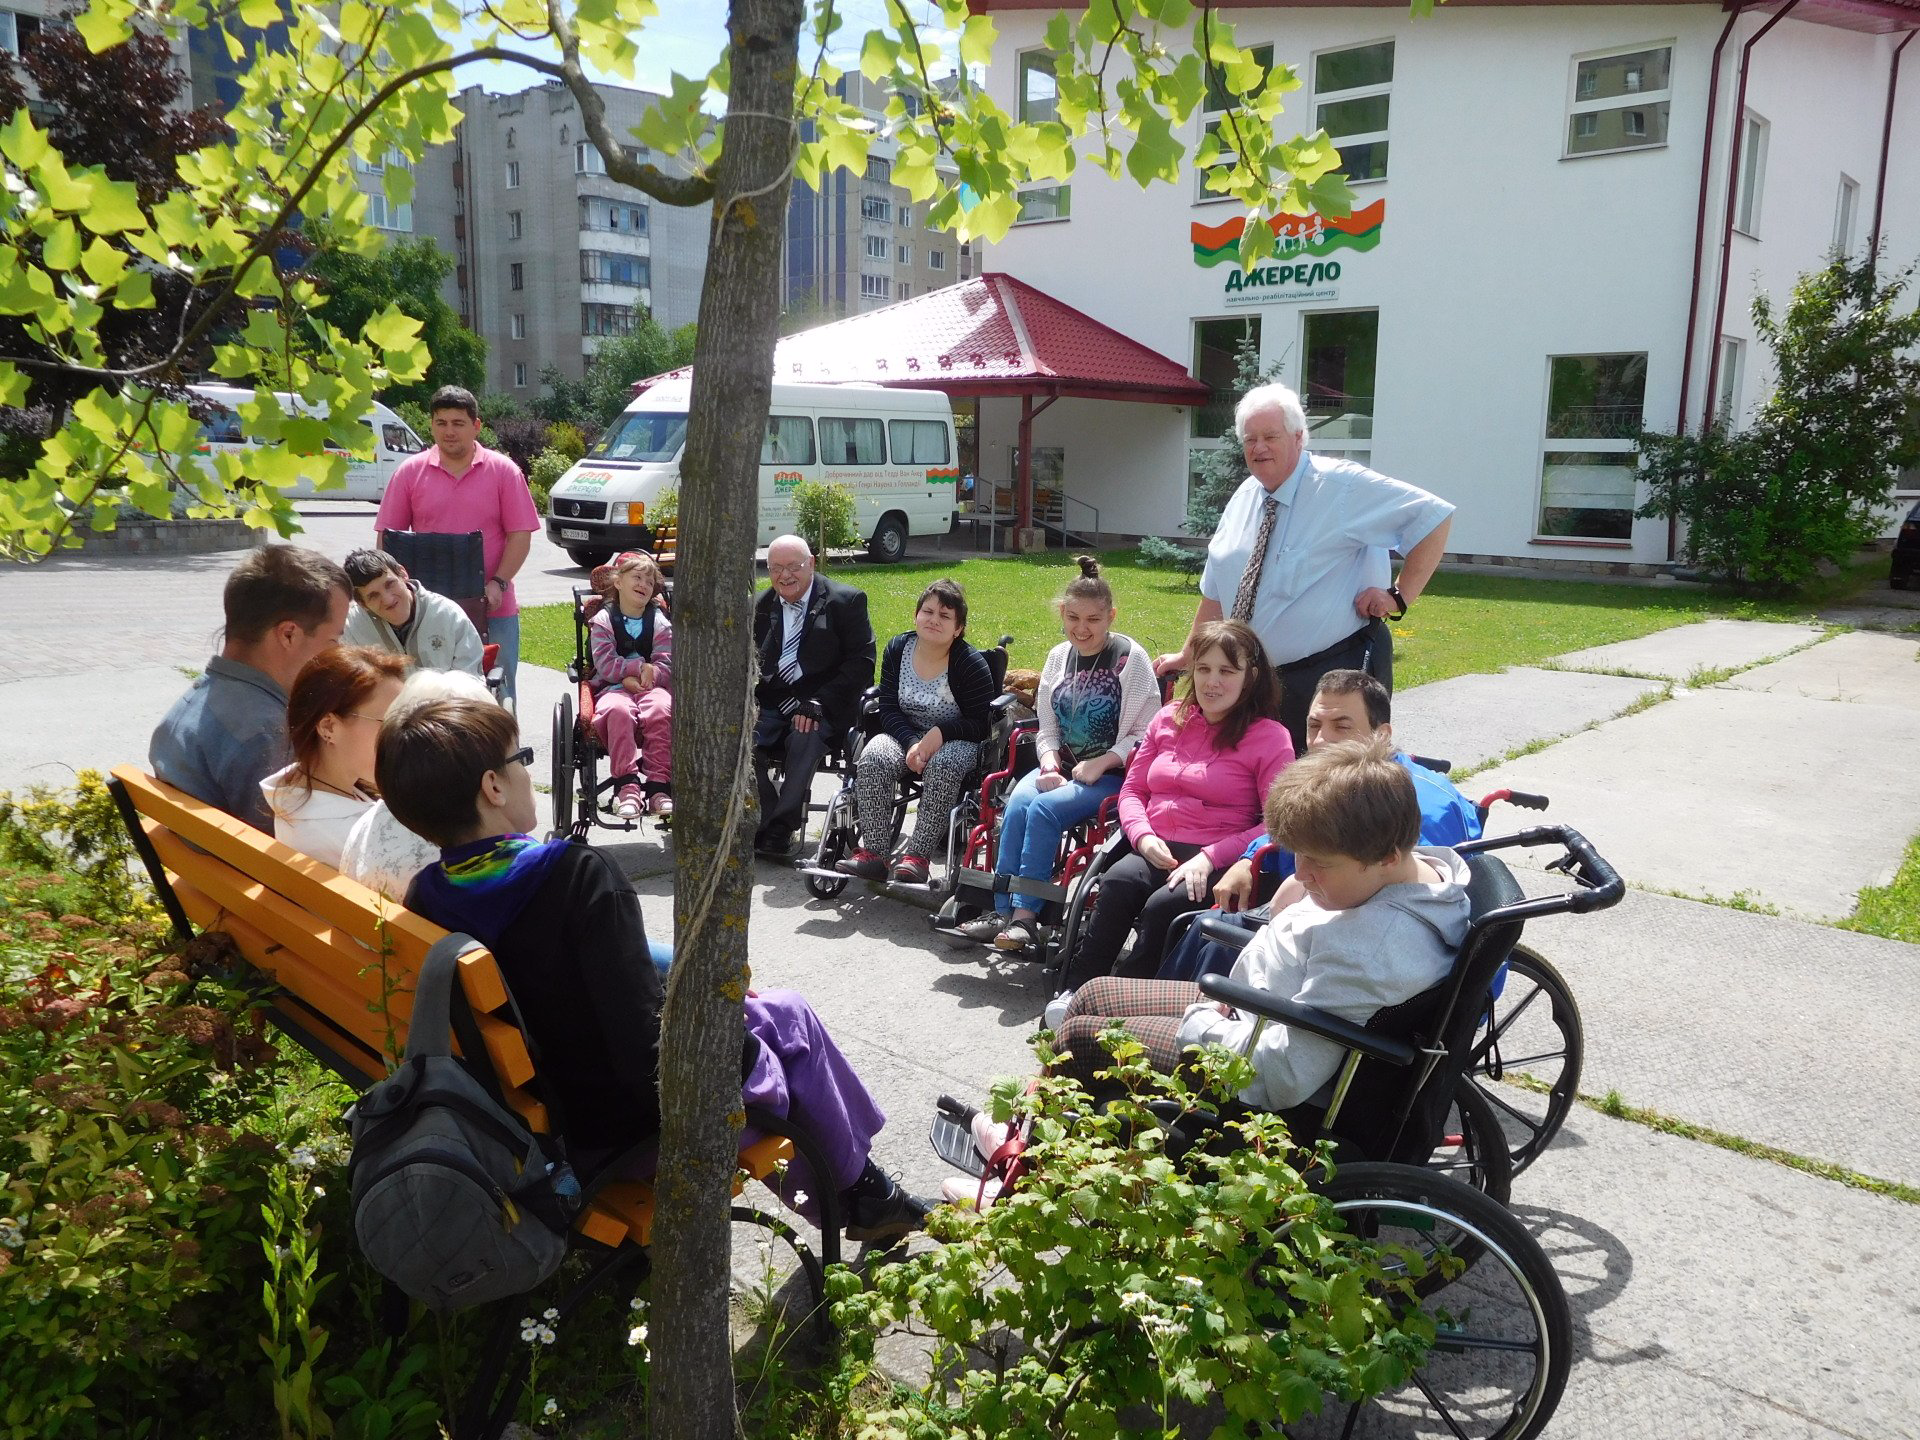 Michael Dunlop and Keith Robertson meeting and working with young disabled wheelchair users in Lviv outside in the Sun